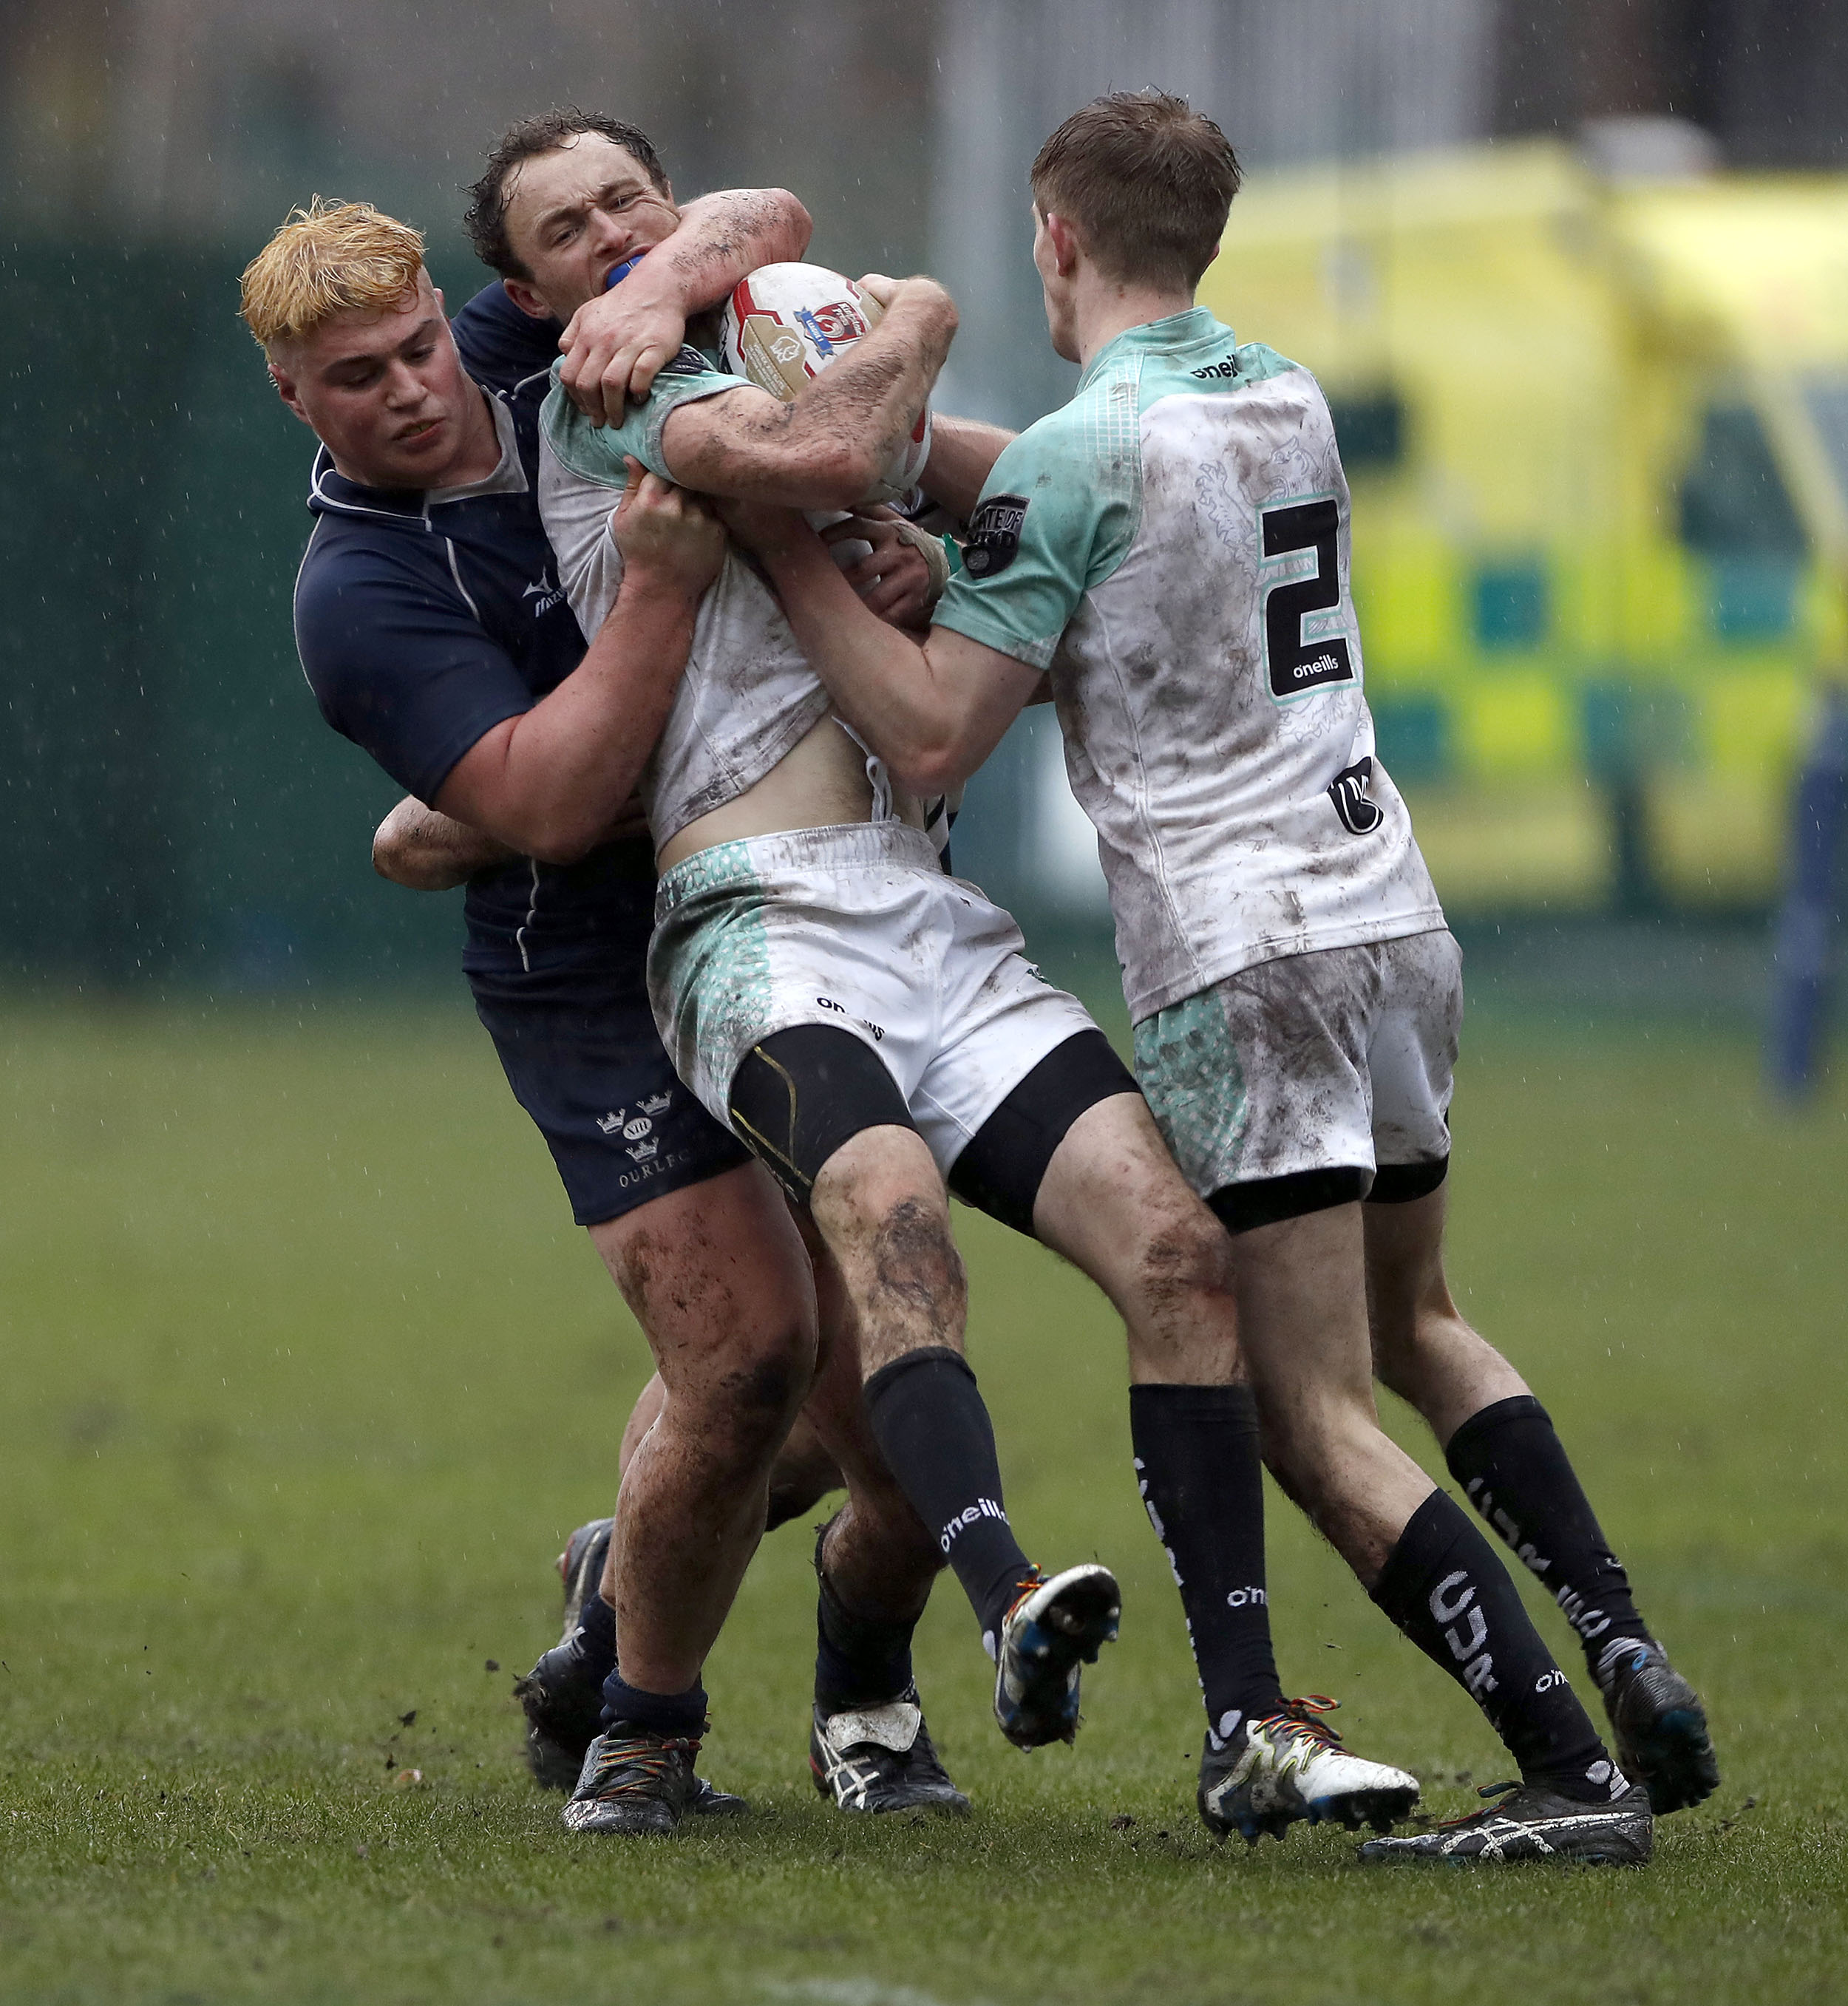 Craig Winfield of Cambridge is tackled by Sven Kerneis (L) during the RCMA Varsity Rugby League game between Cambridge University and Oxford University at the HAC Ground, Moorgate, London on Fri Mar 9, 2018